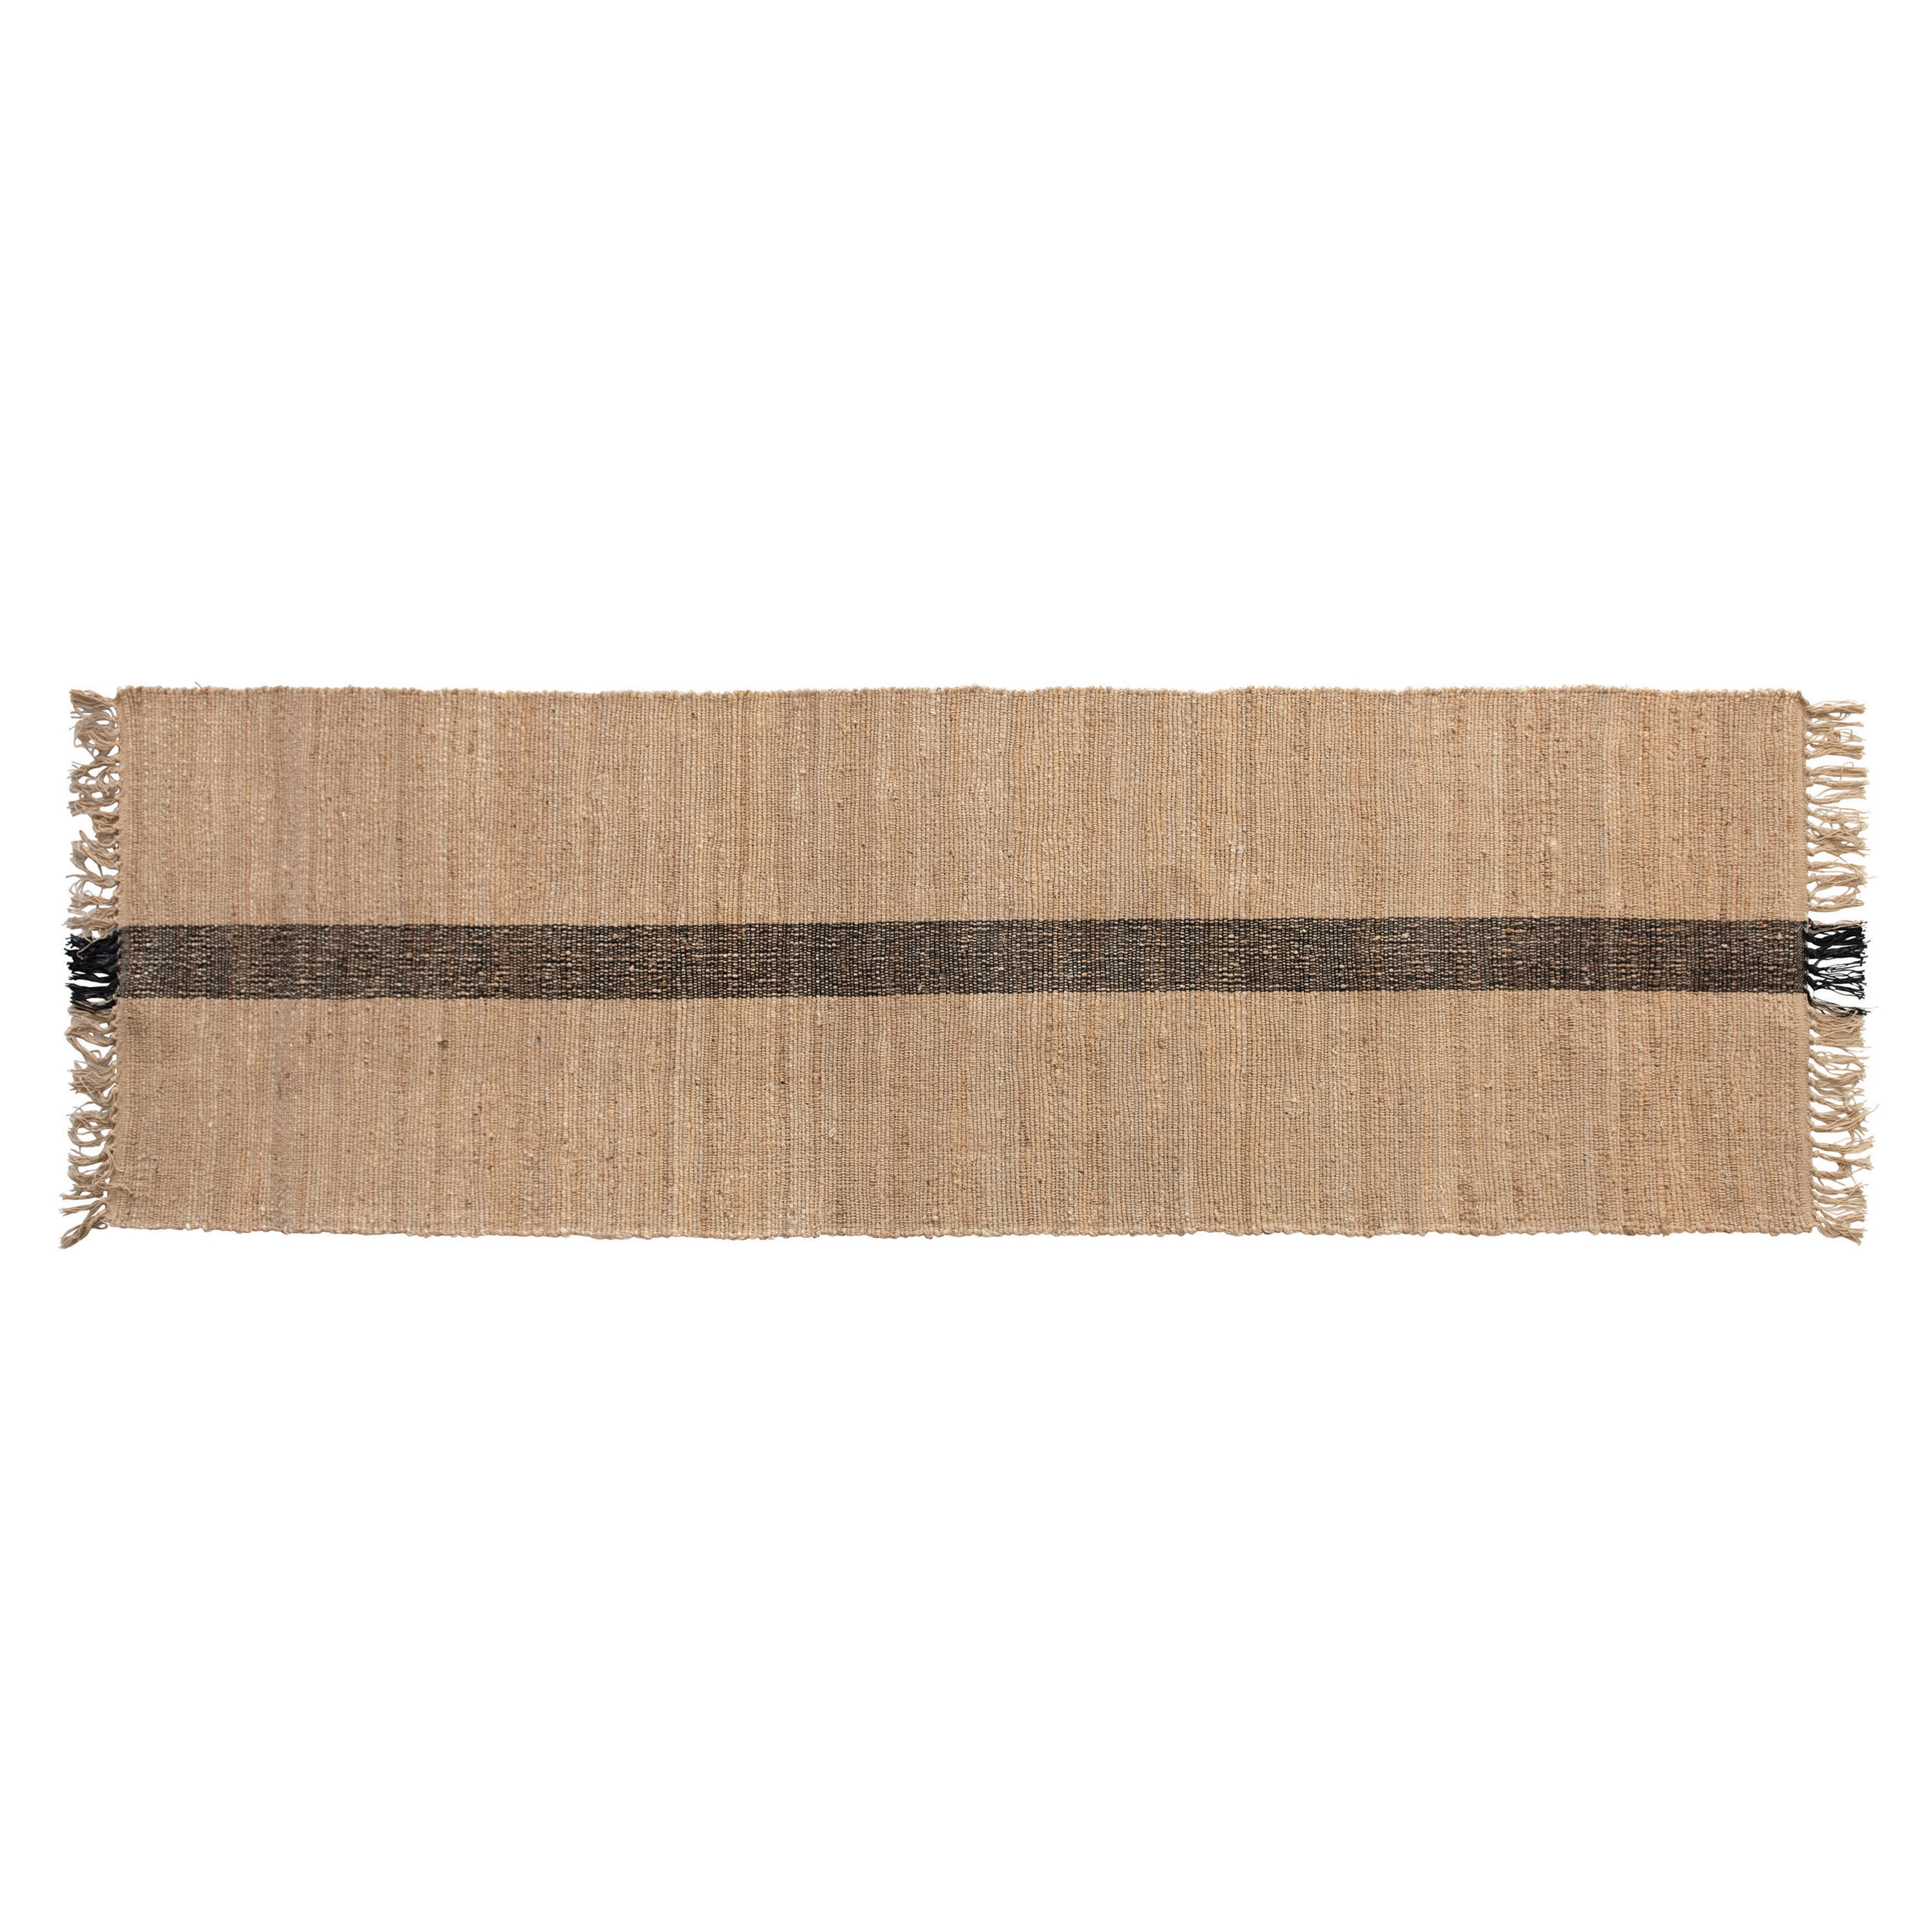 Jute & Cotton Floor Runner with Black Woven Stripe, Natural - Nomad Home